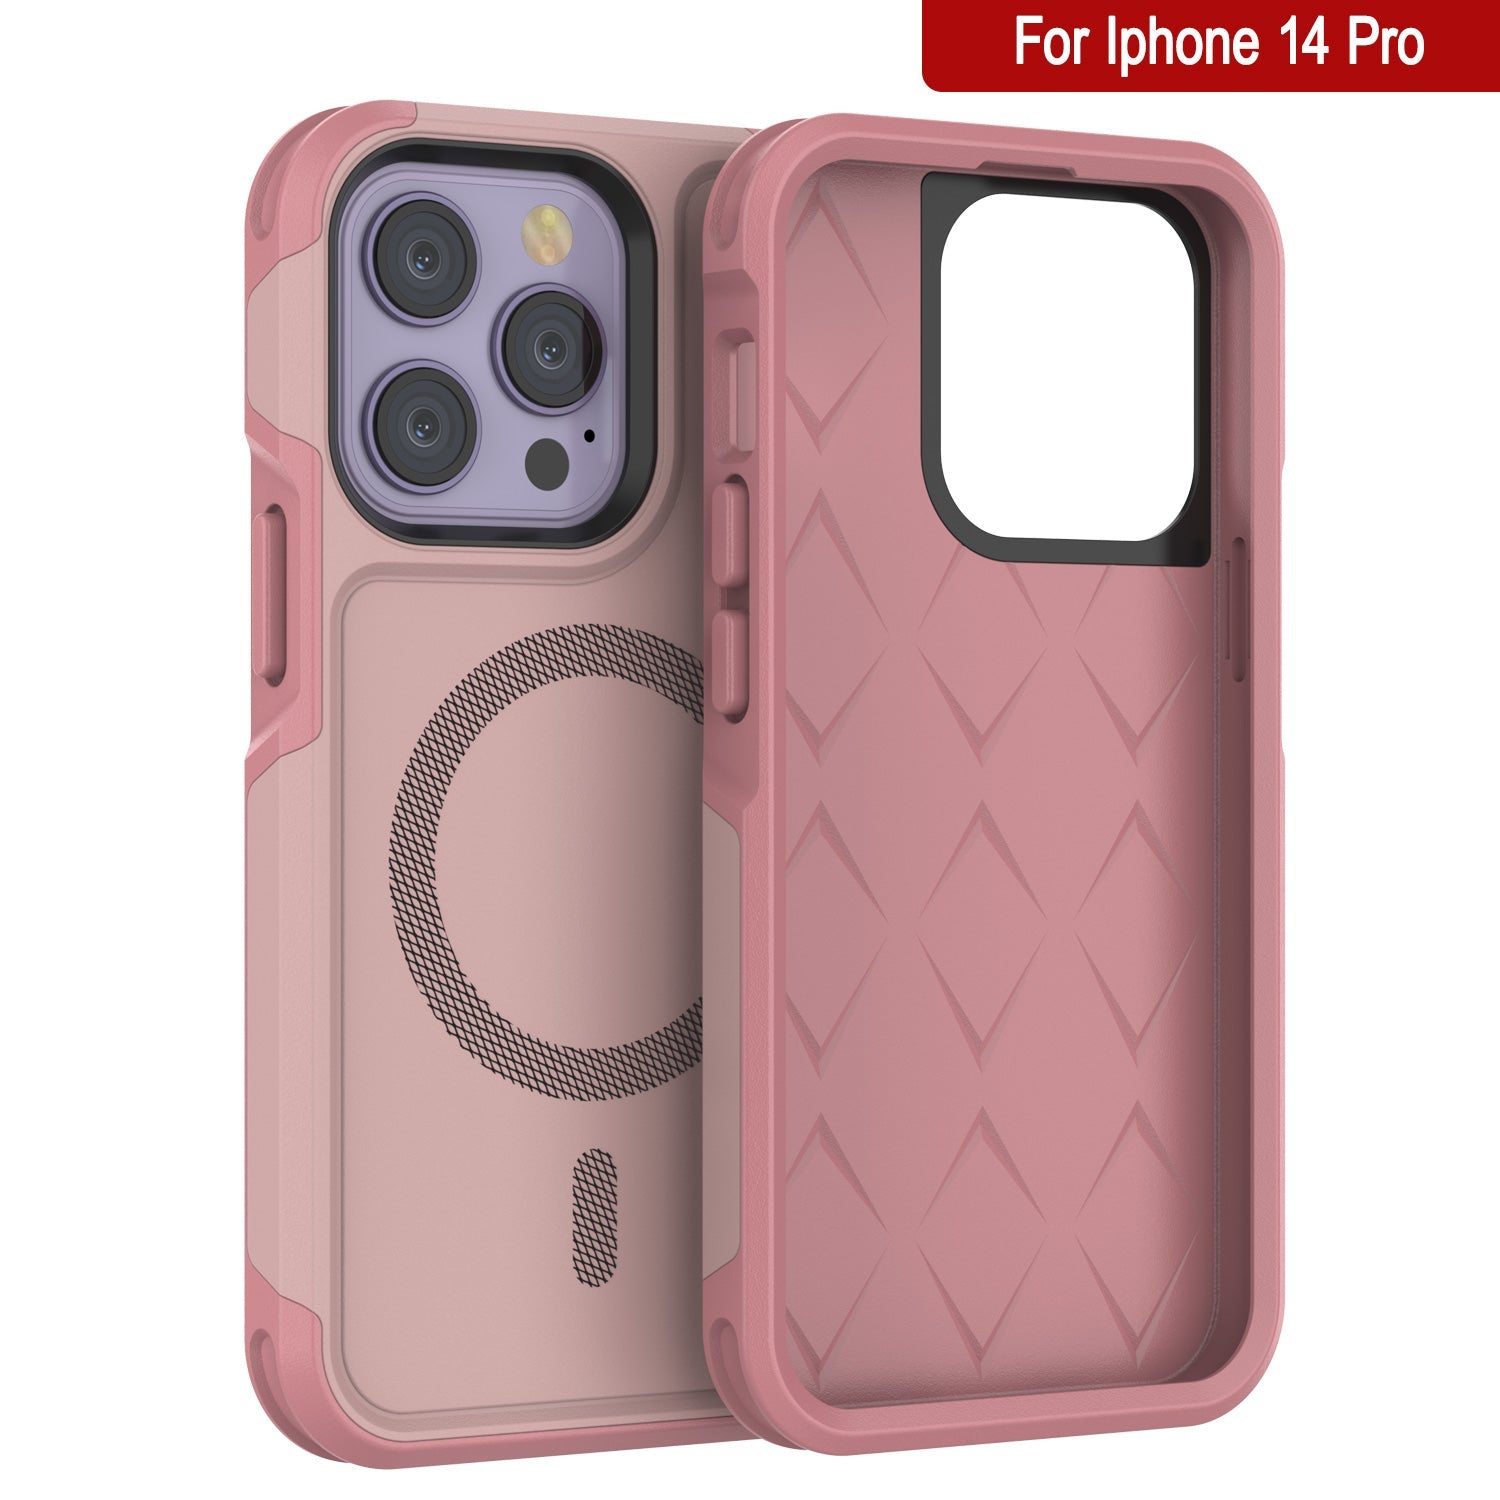 PunkCase iPhone 14 Pro Case, [Spartan 2.0 Series] Clear Rugged Heavy Duty Cover W/Built in Screen Protector [Pink]